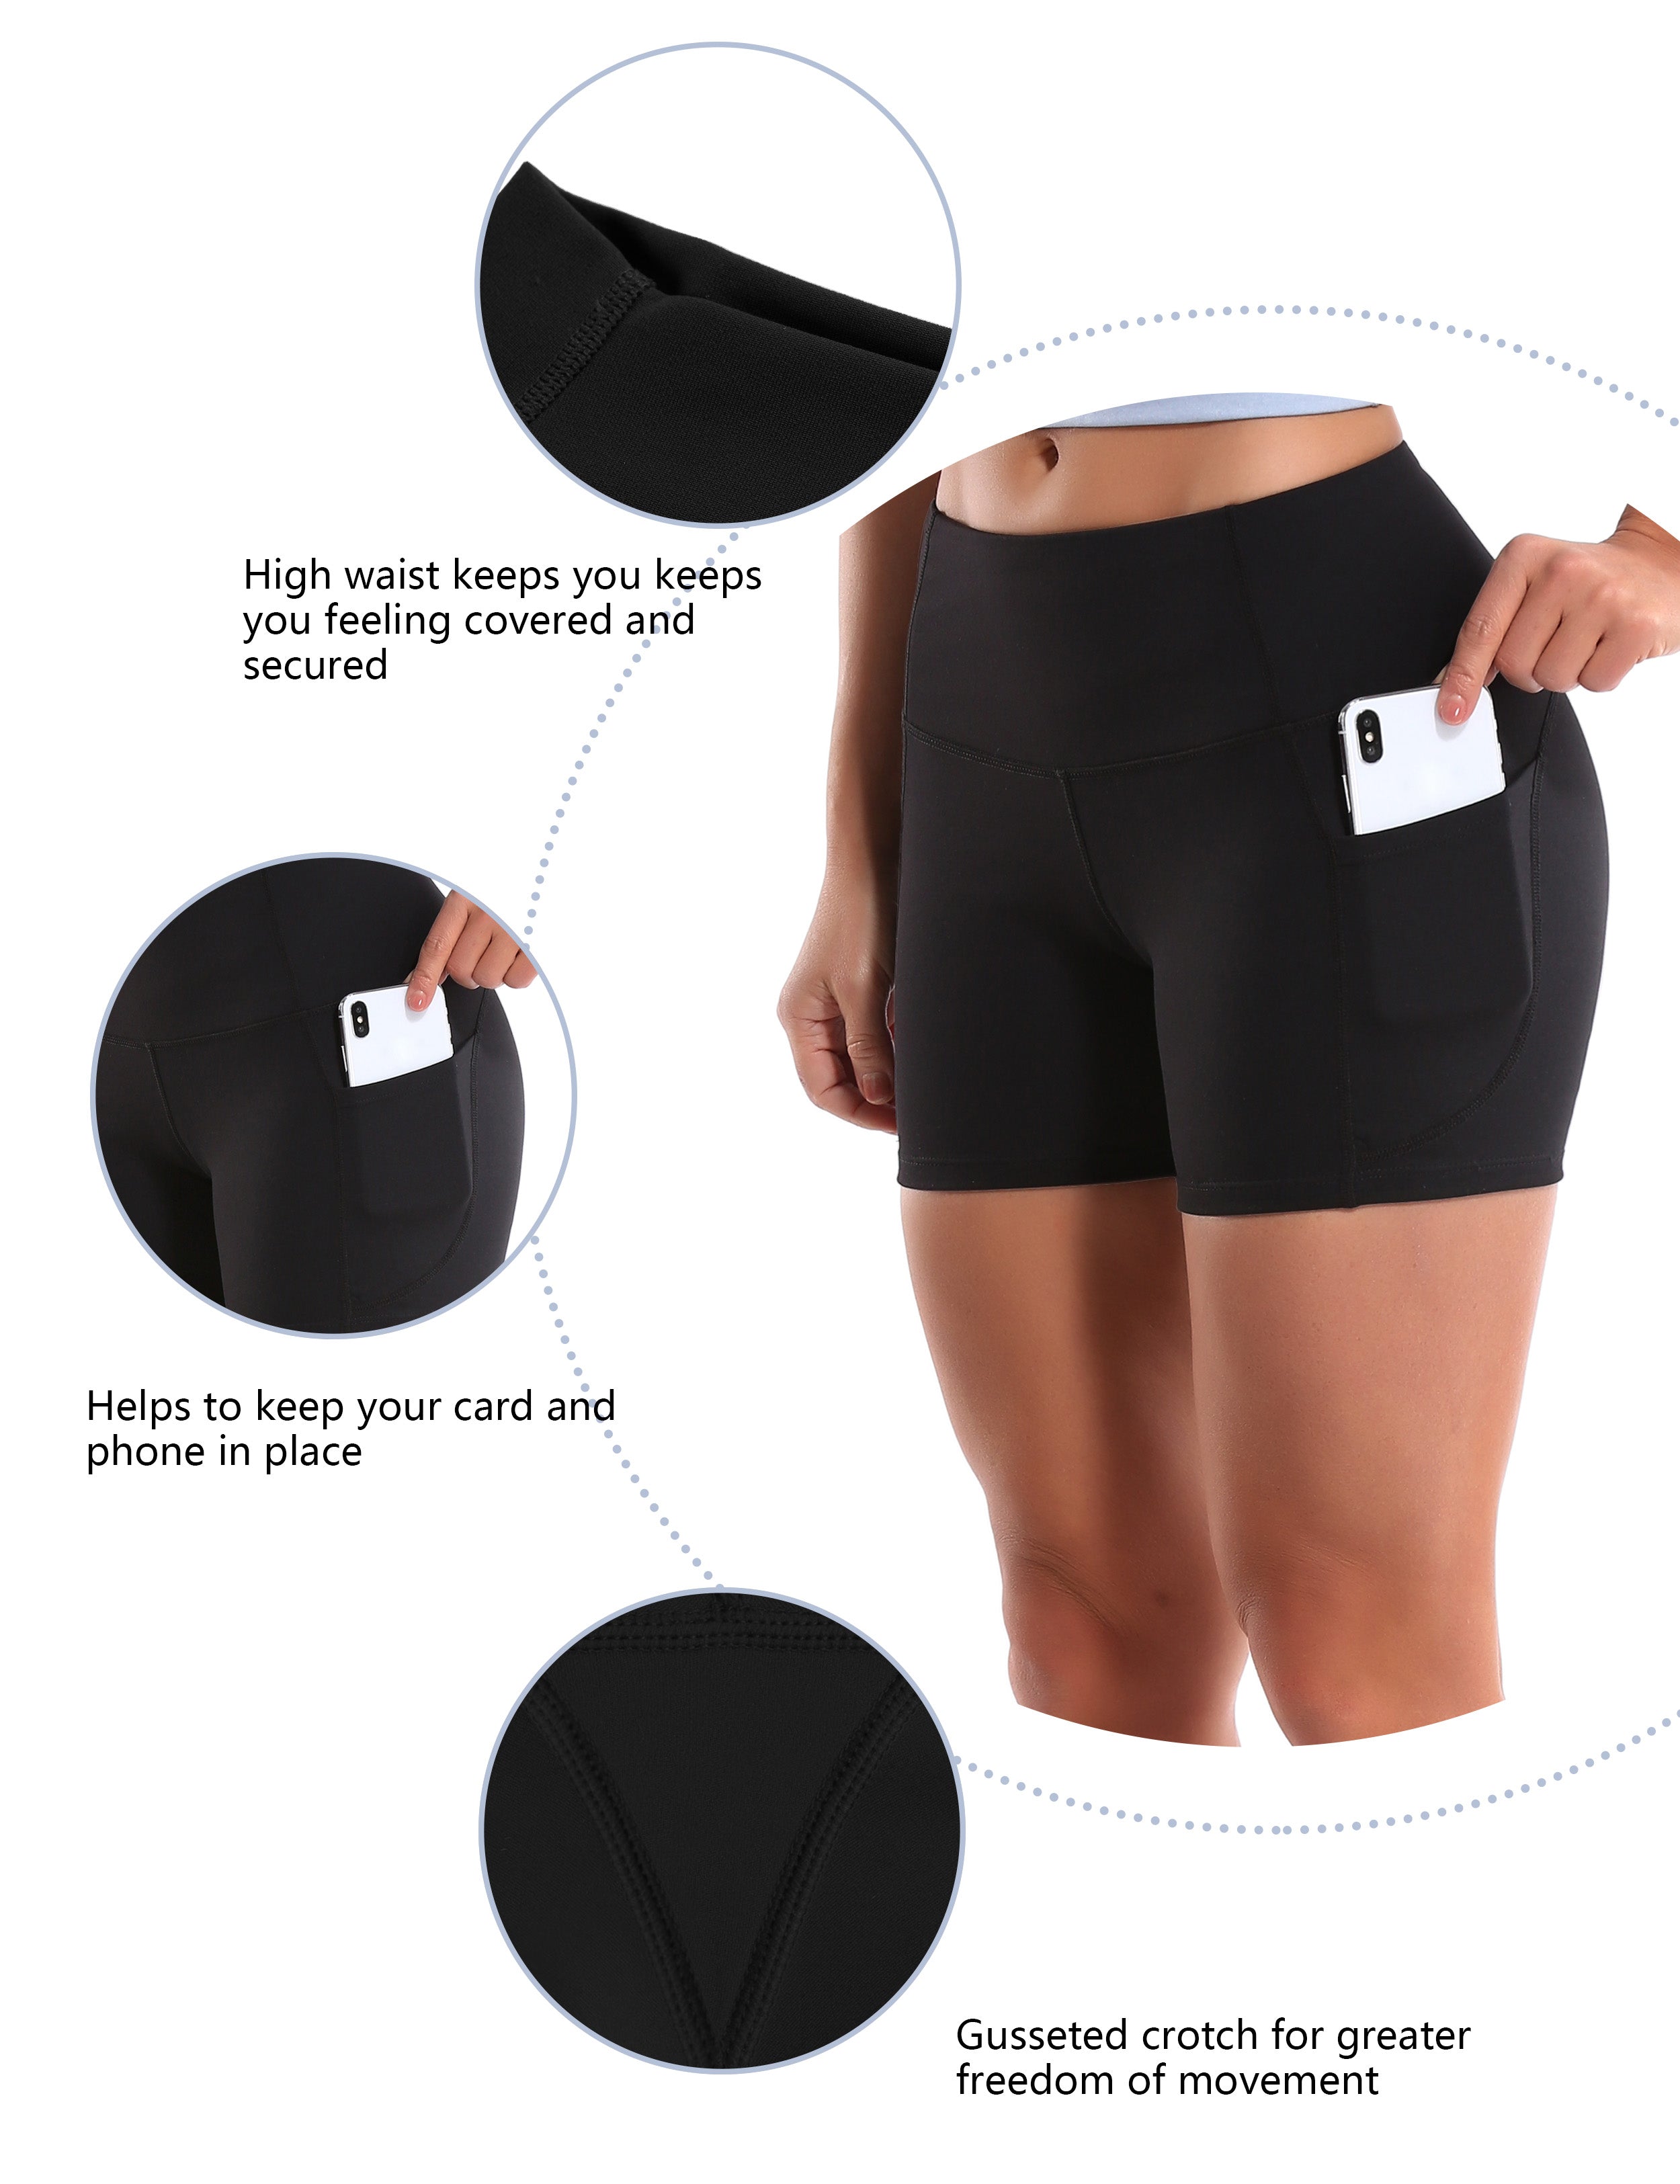 High Waist Side Pockets yogastudio Shorts black Softest-ever fabric High elasticity 4-way stretch Fabric doesn't attract lint easily No see-through Moisture-wicking Machine wash 88% Nylon, 12% Spandex